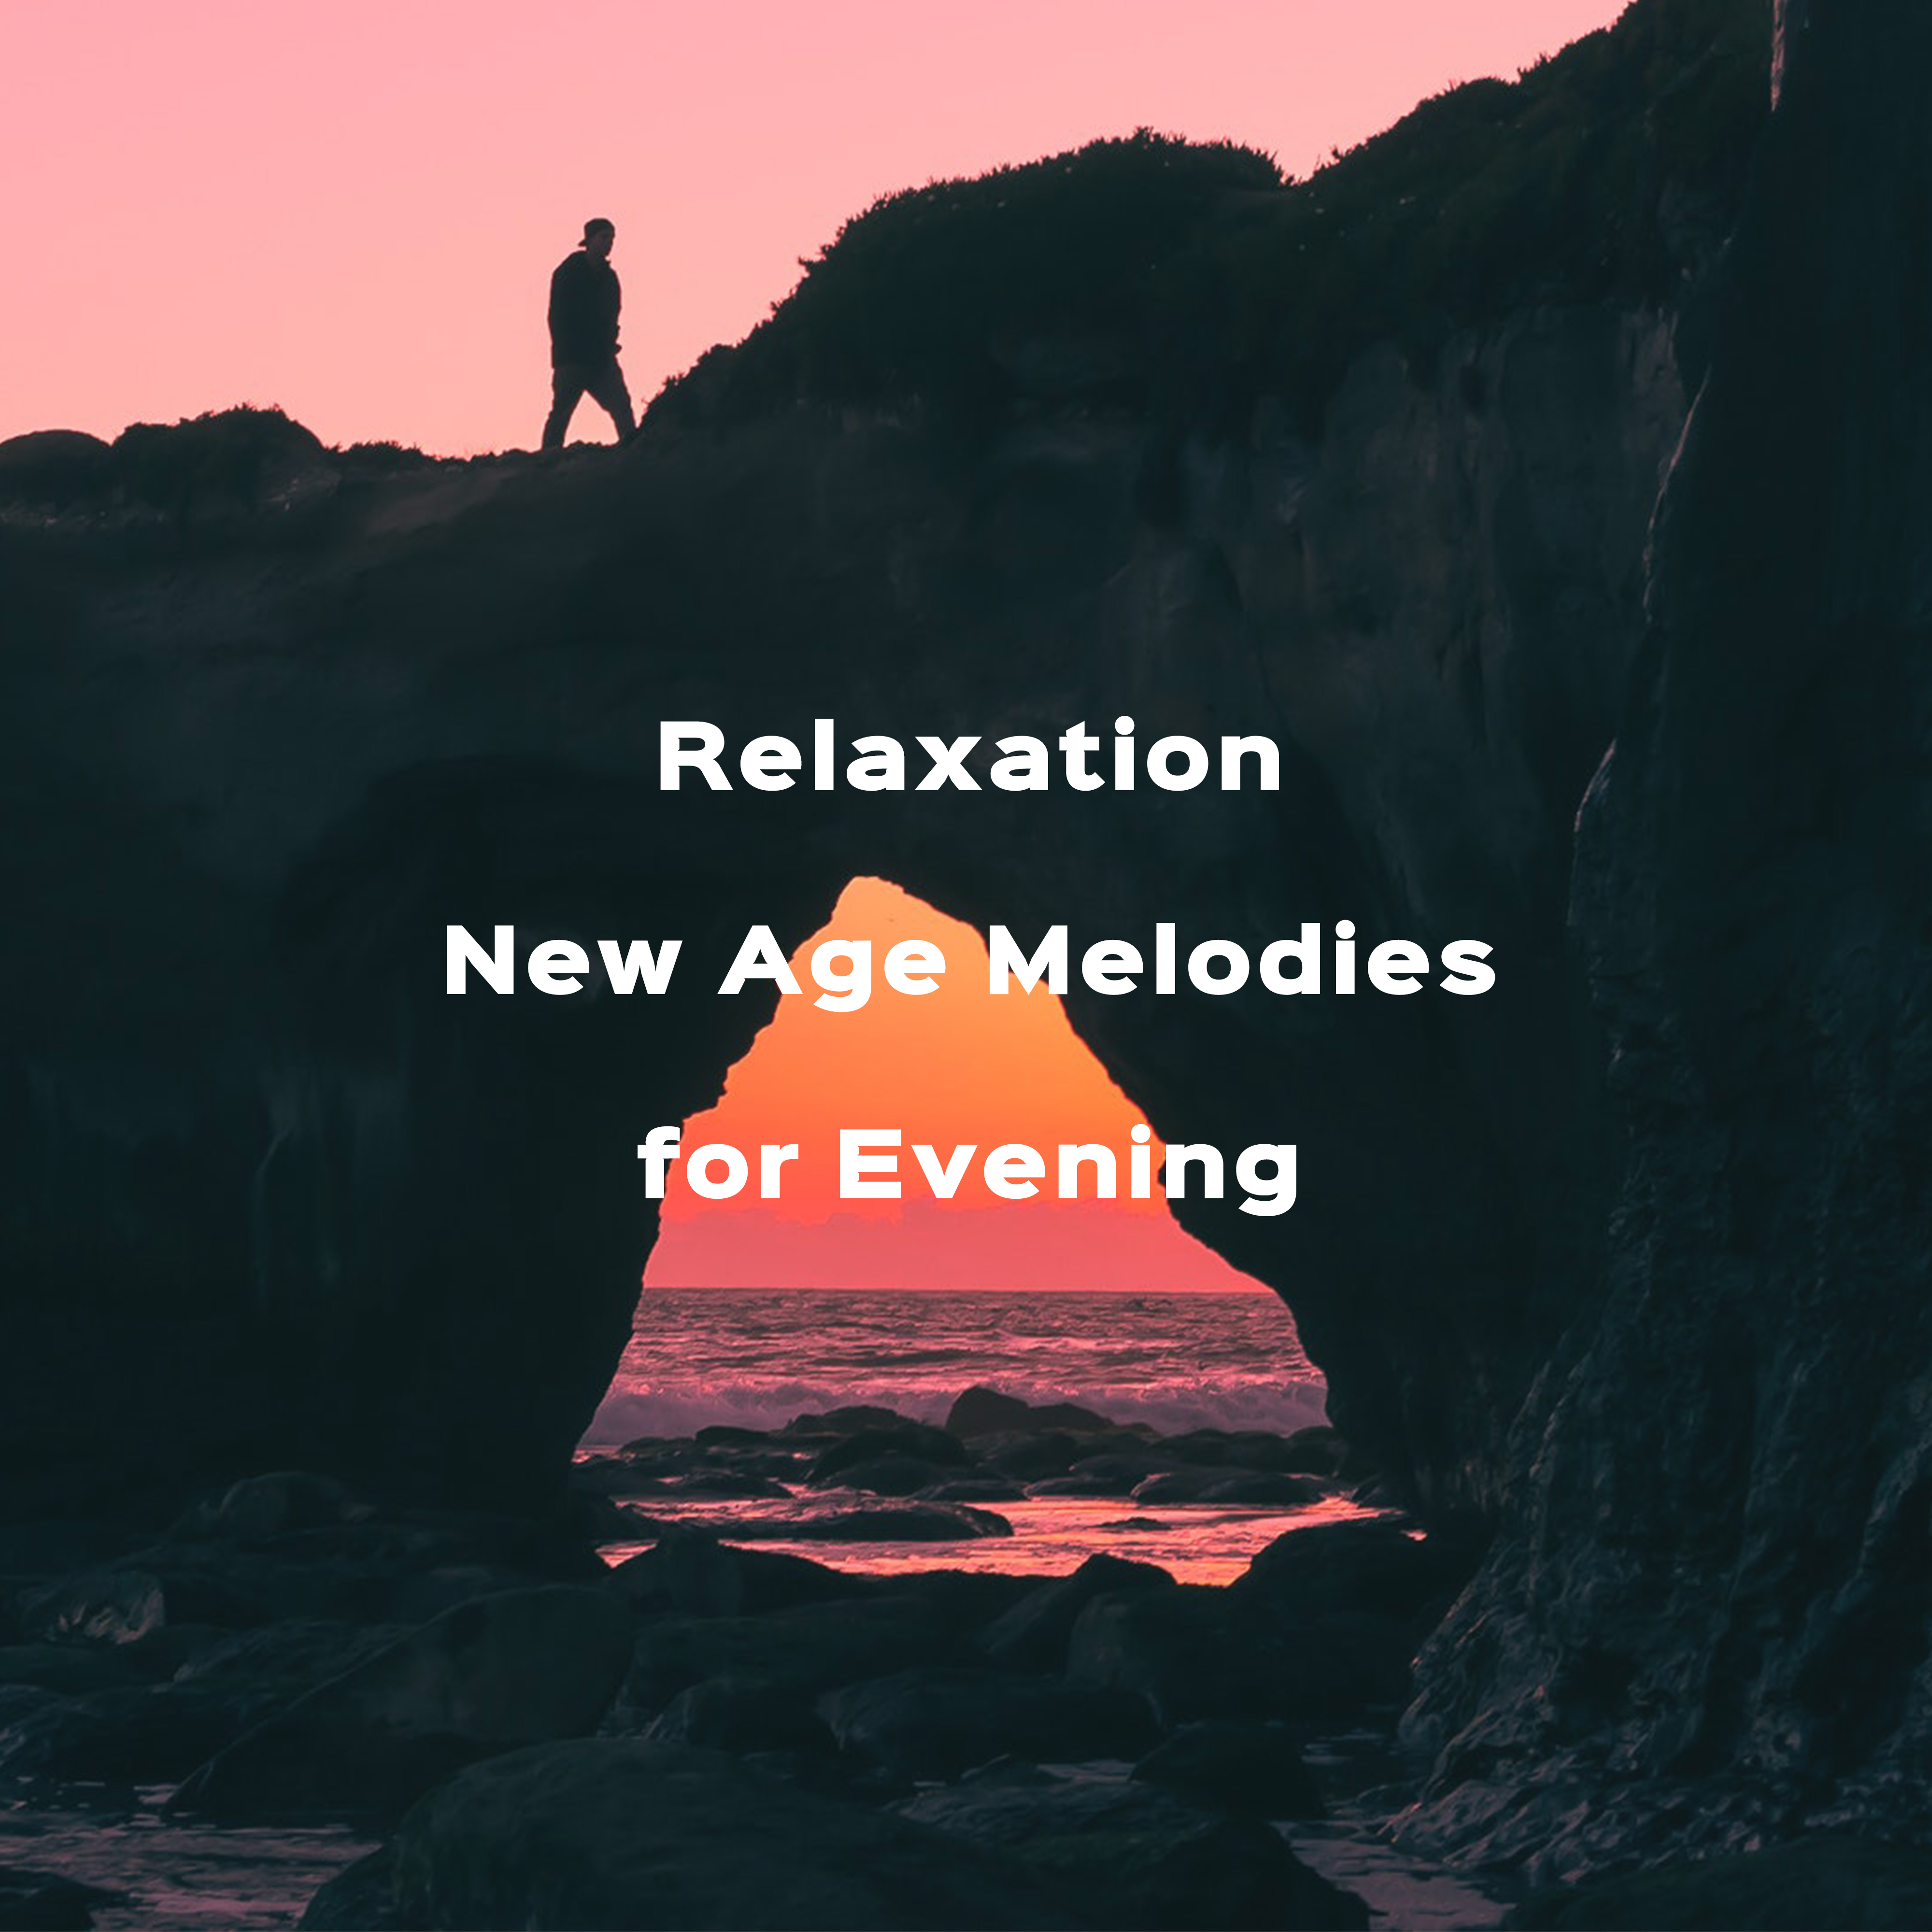 Relaxation New Age Melodies for Evening